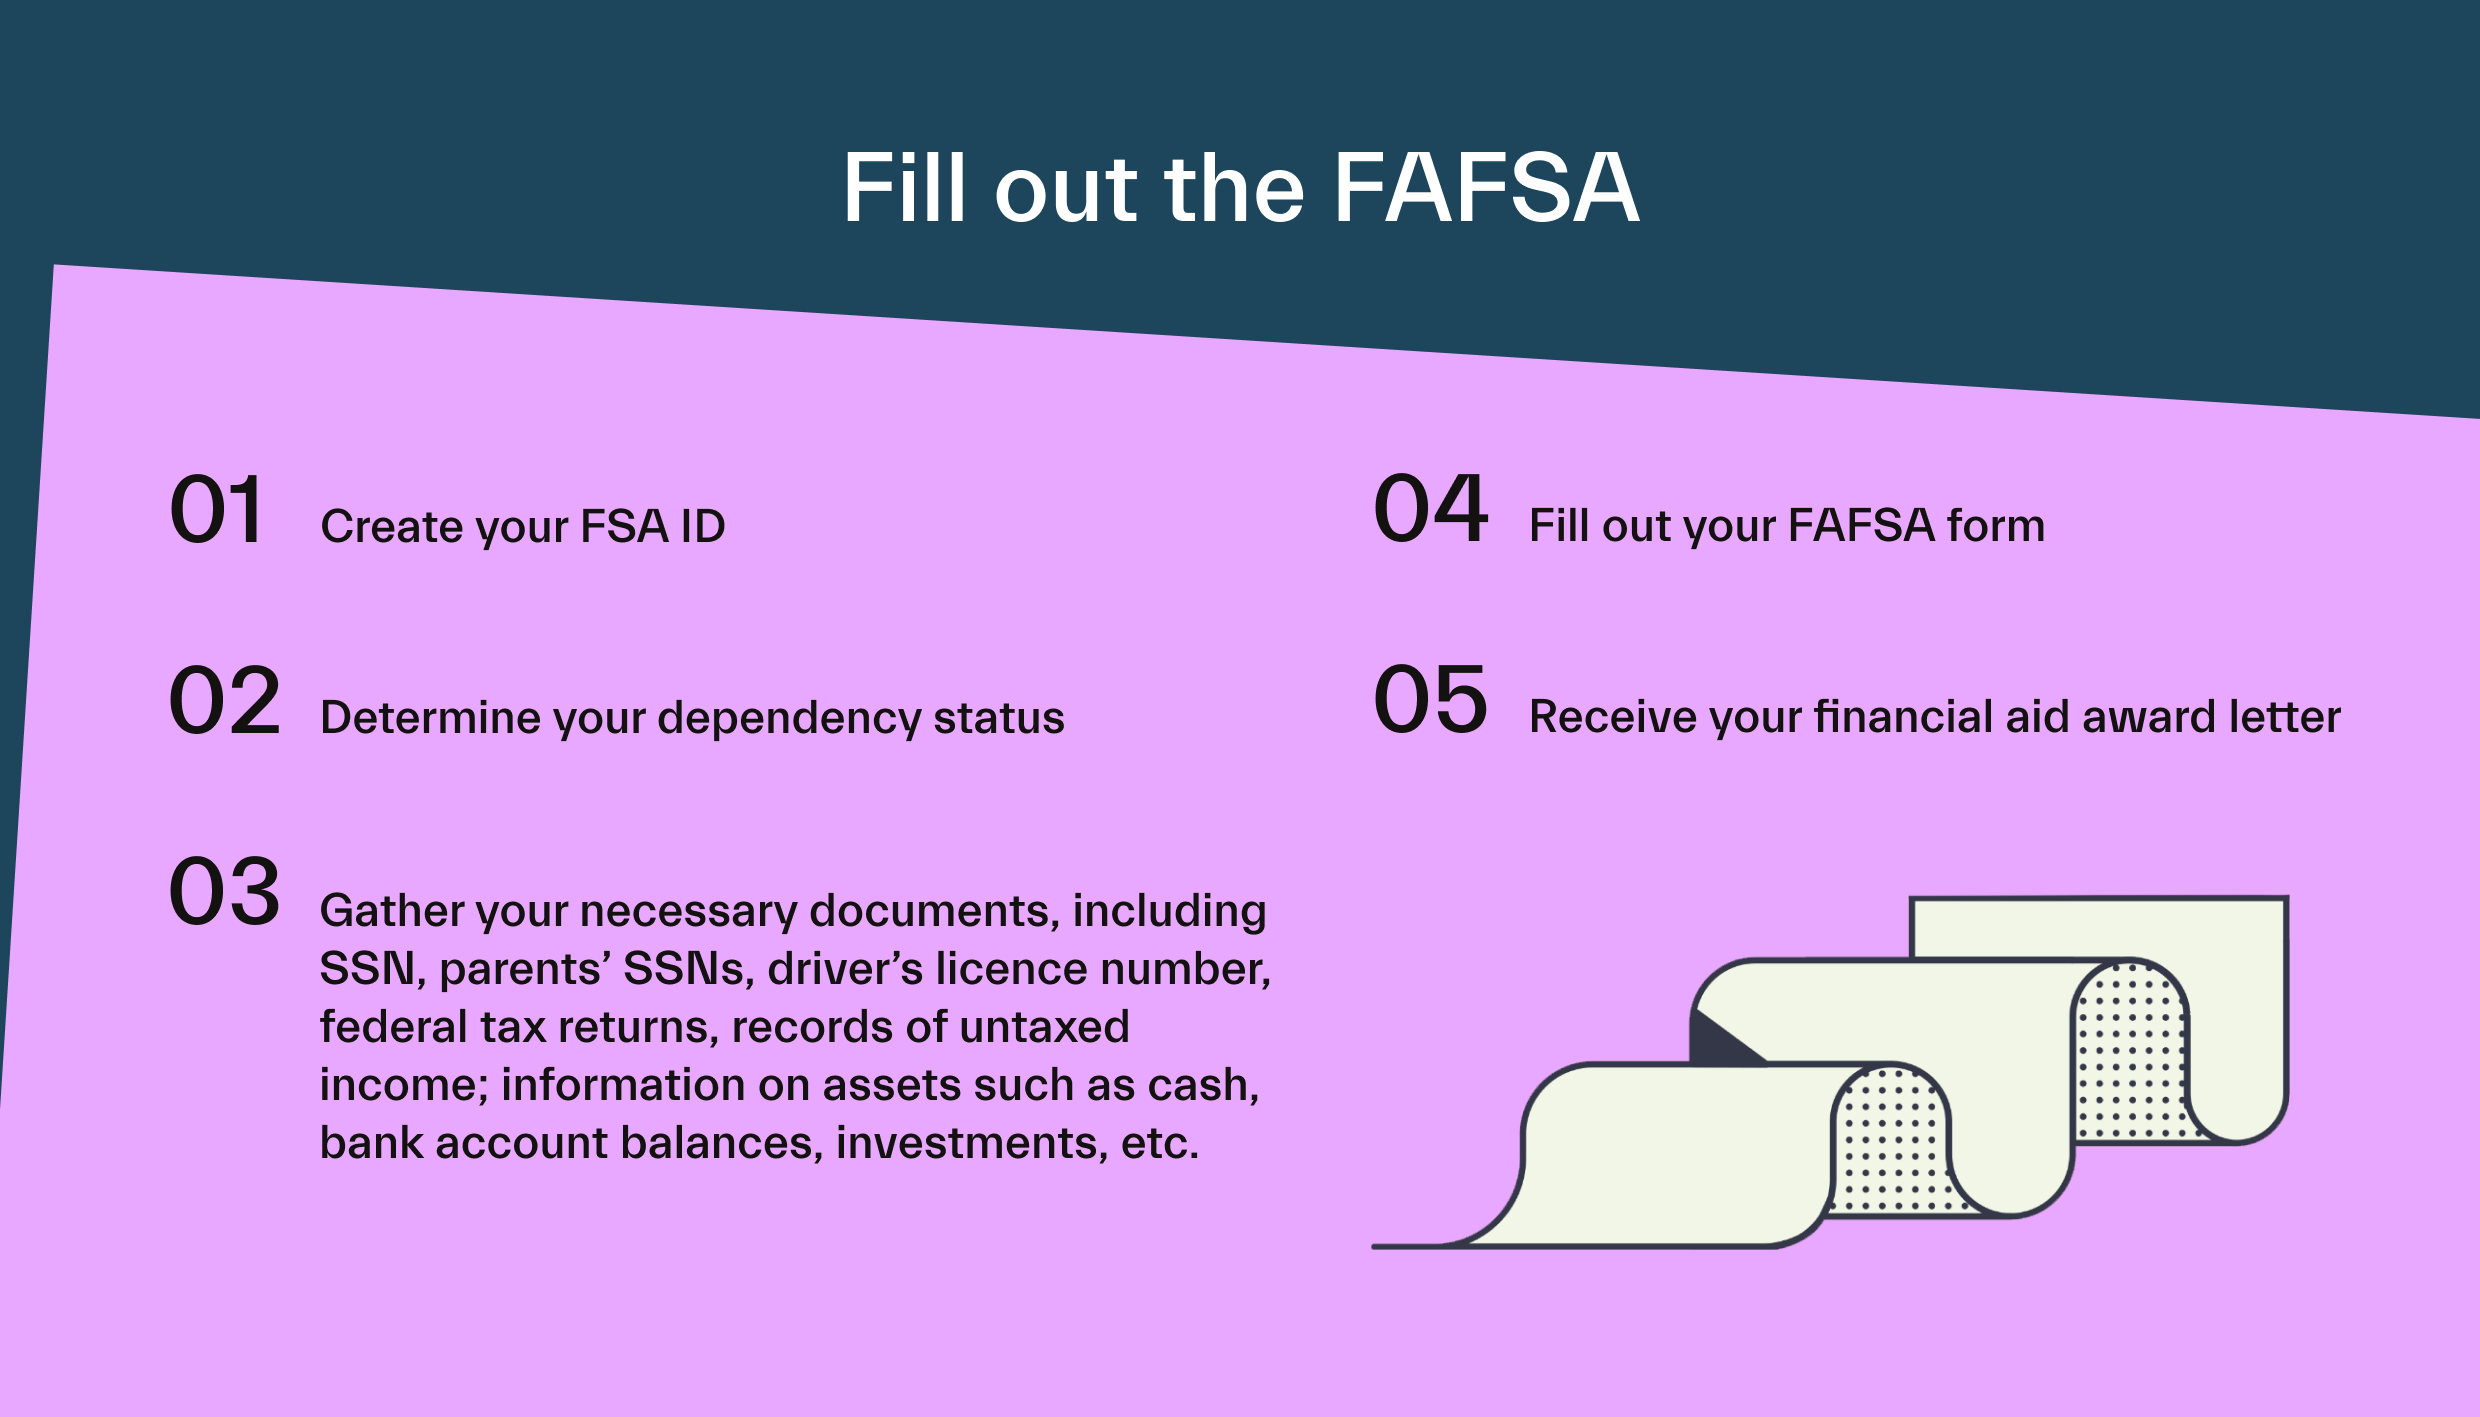 How to fill out the FAFSA